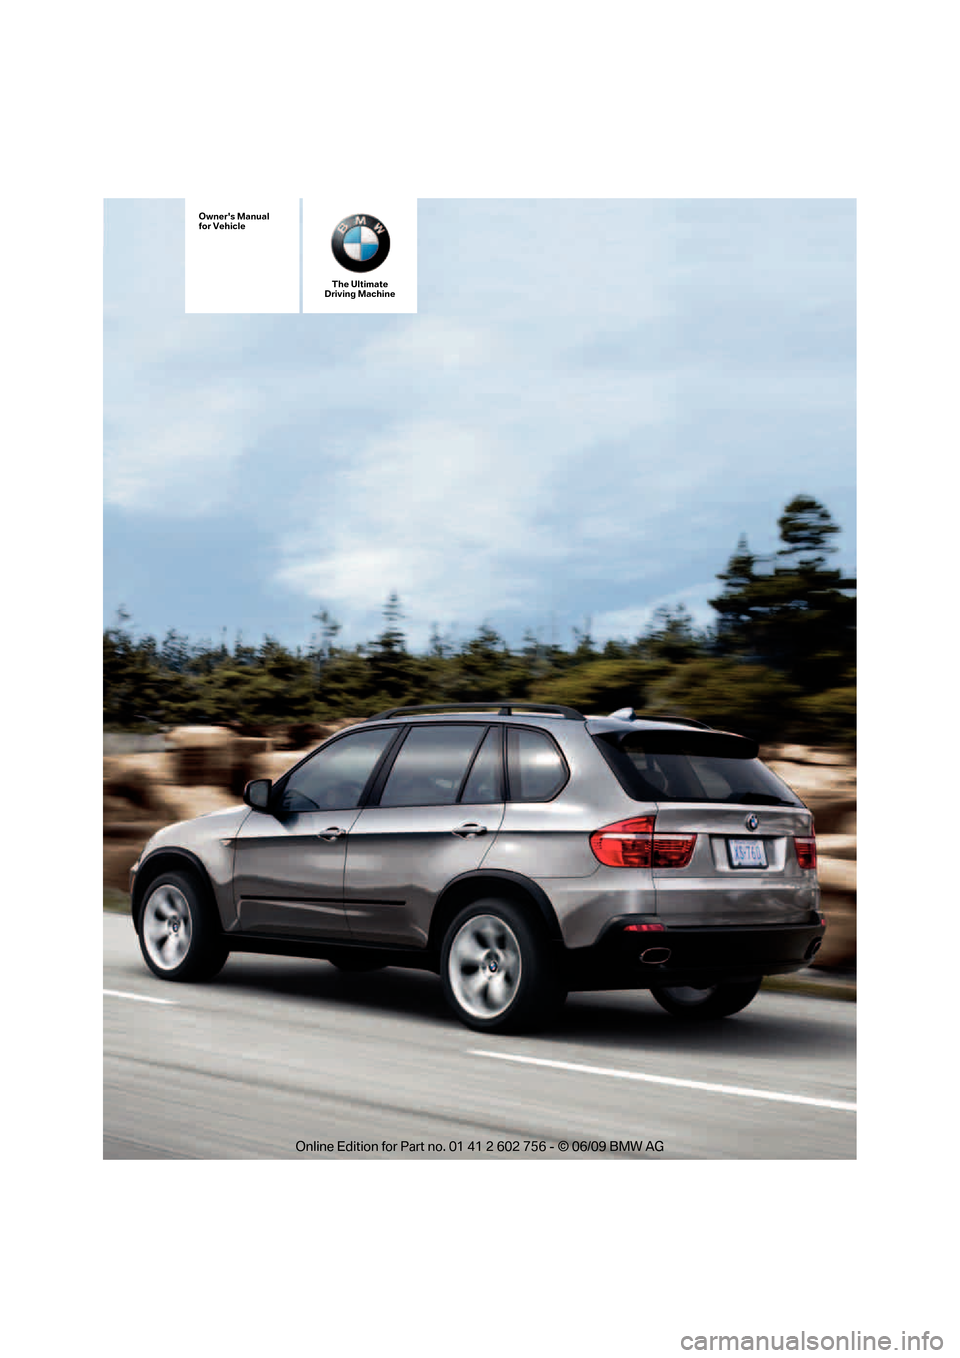 BMW X5 XDRIVE 35D 2010 E70 Owners Manual The Ultimate
Driving Machine
Owners Manual
for Vehicle
ba8_e70ag.book  Seite 1  Freitag, 5. Juni 2009  11:42 11 